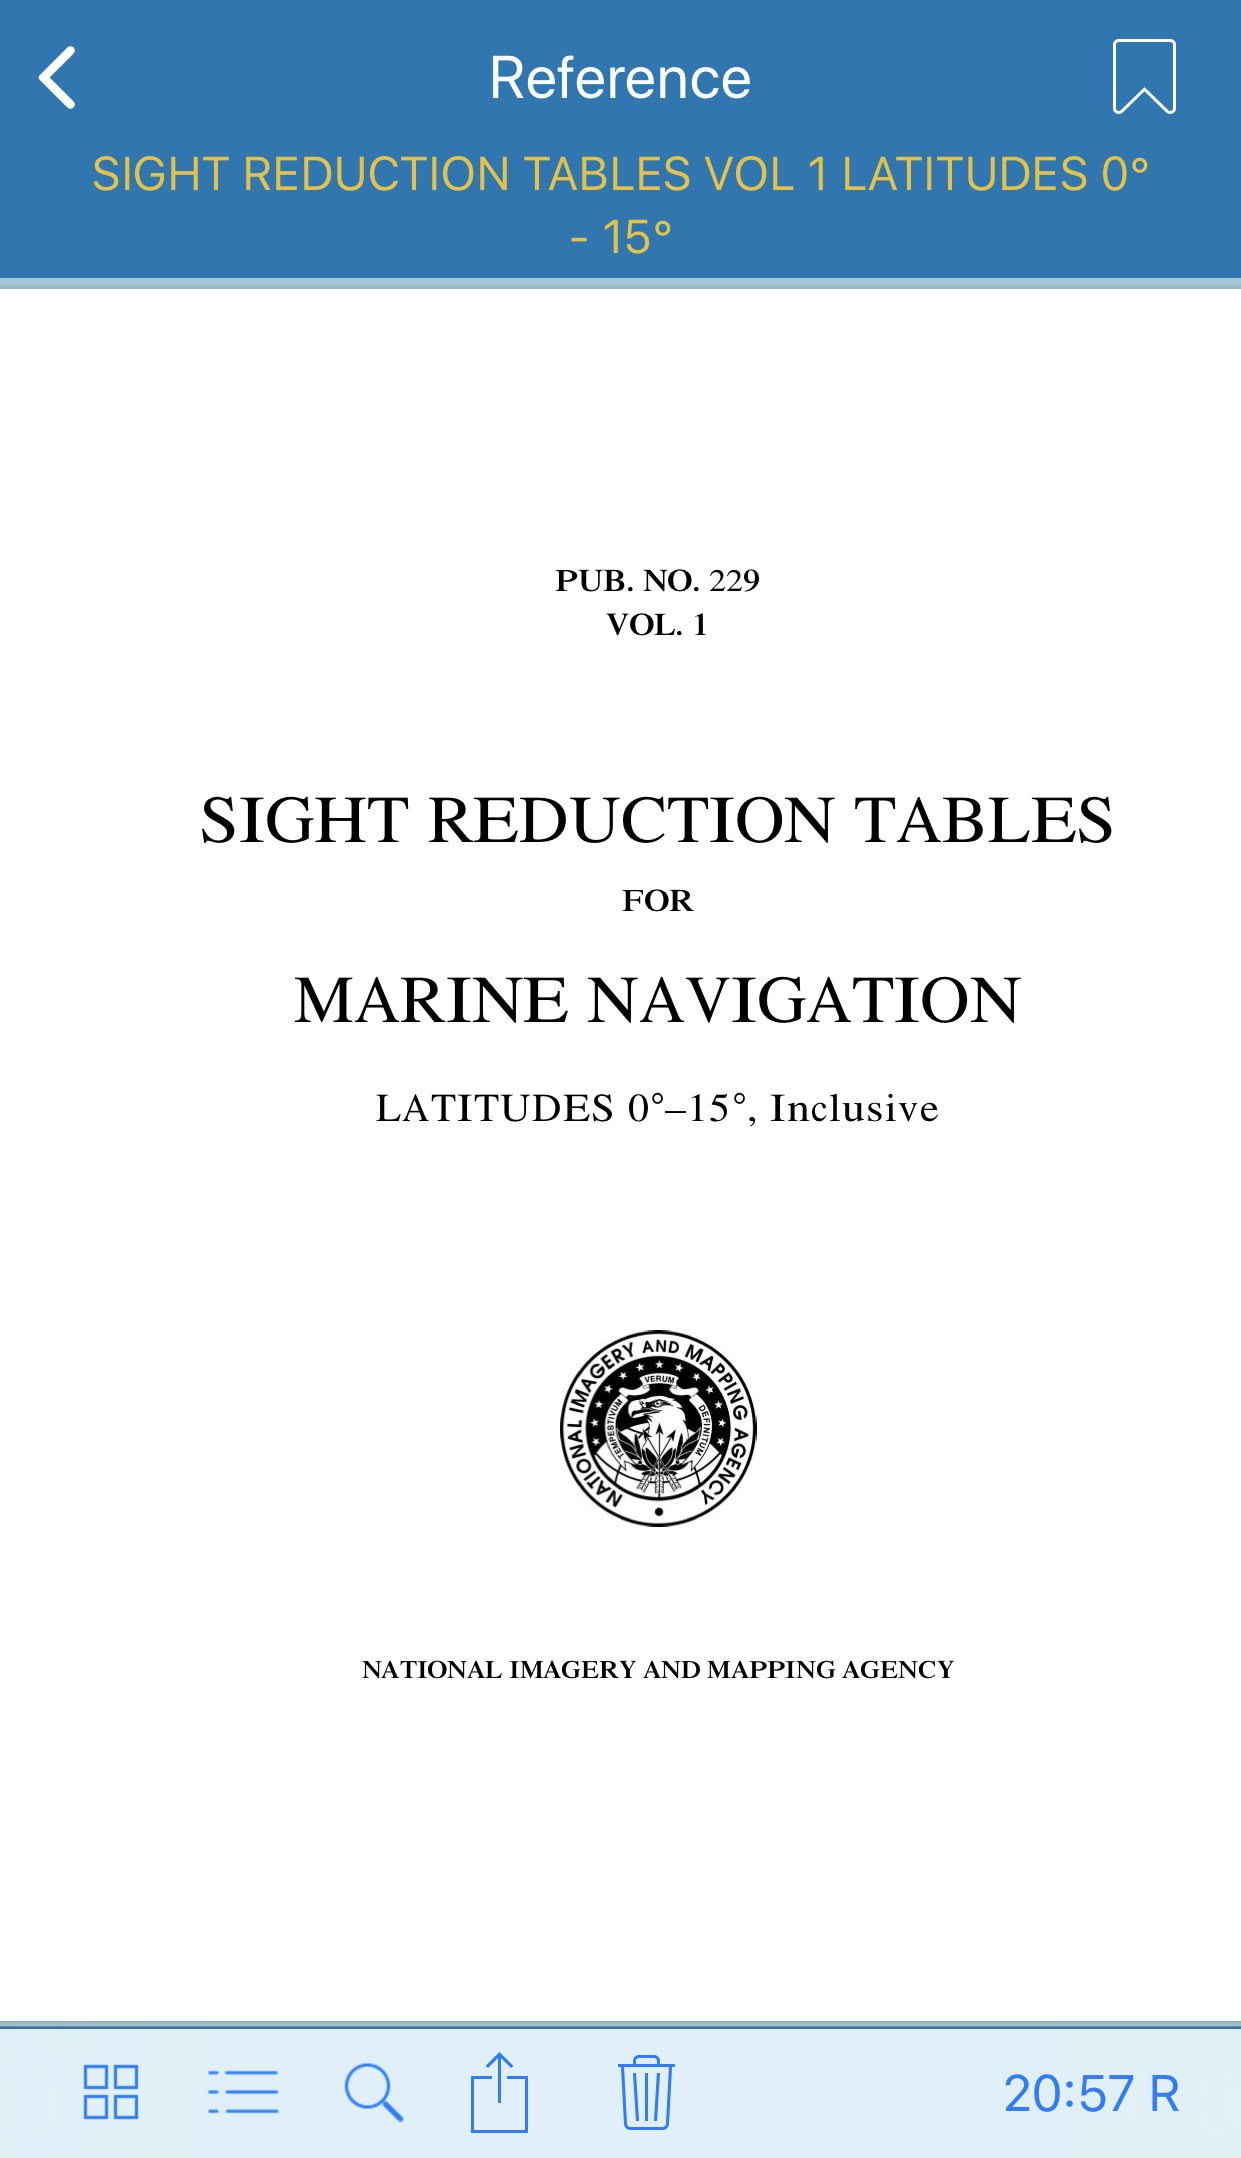 Sight Reduction Tables Reference